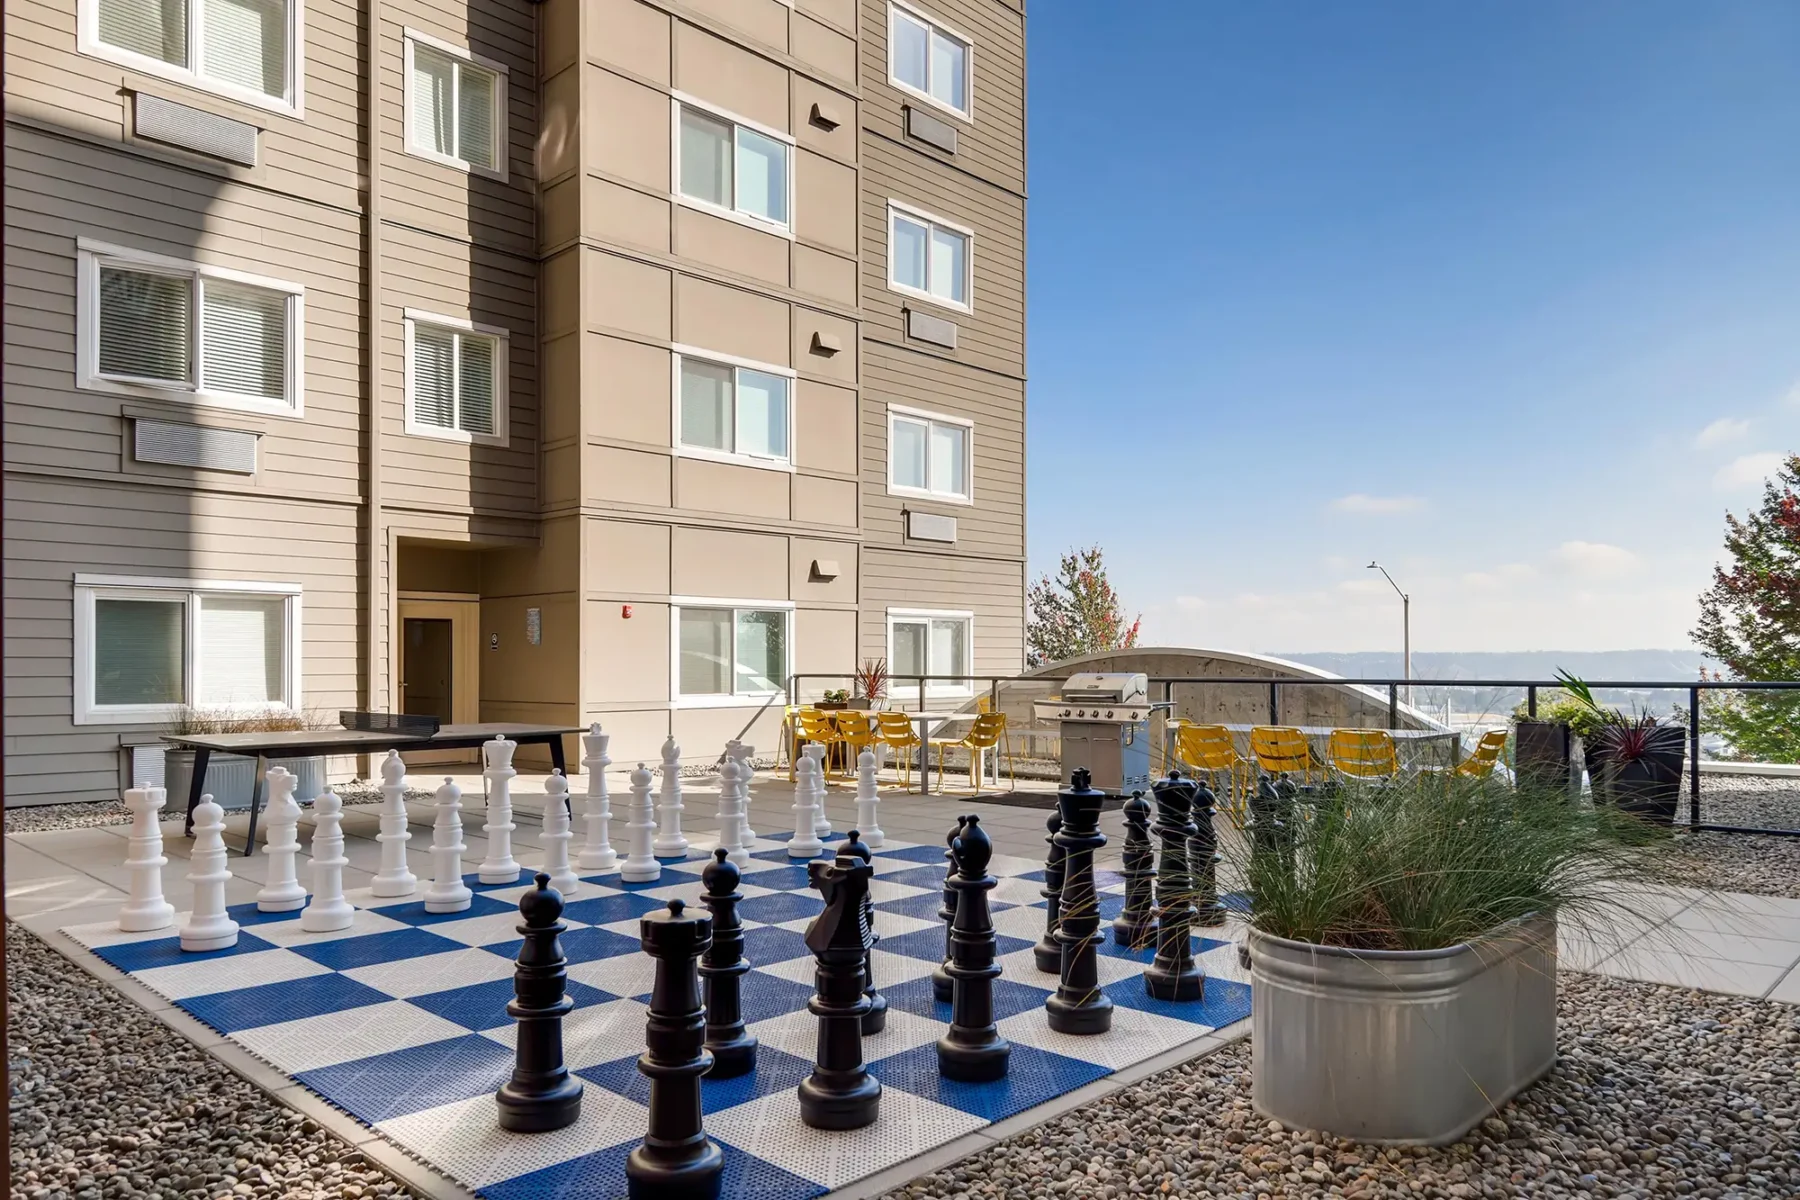 Outdoor courtyard with grill, ping pong table, and giant chess